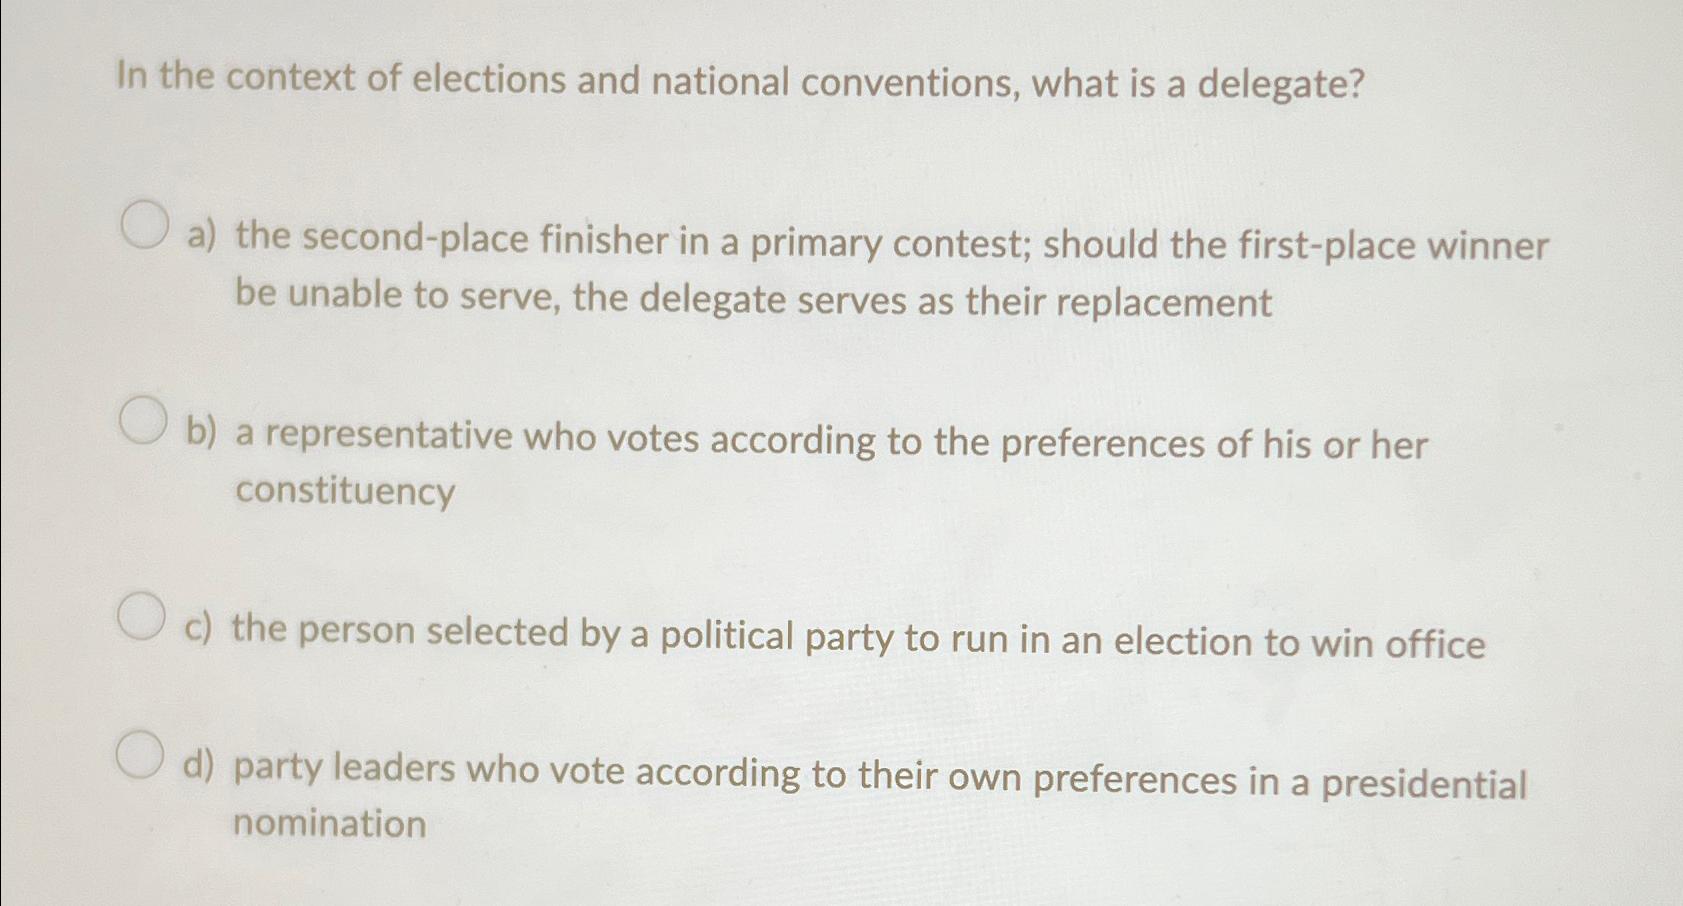 In the context of elections and national conventions, what is a delegate? a) the second-place finisher in a